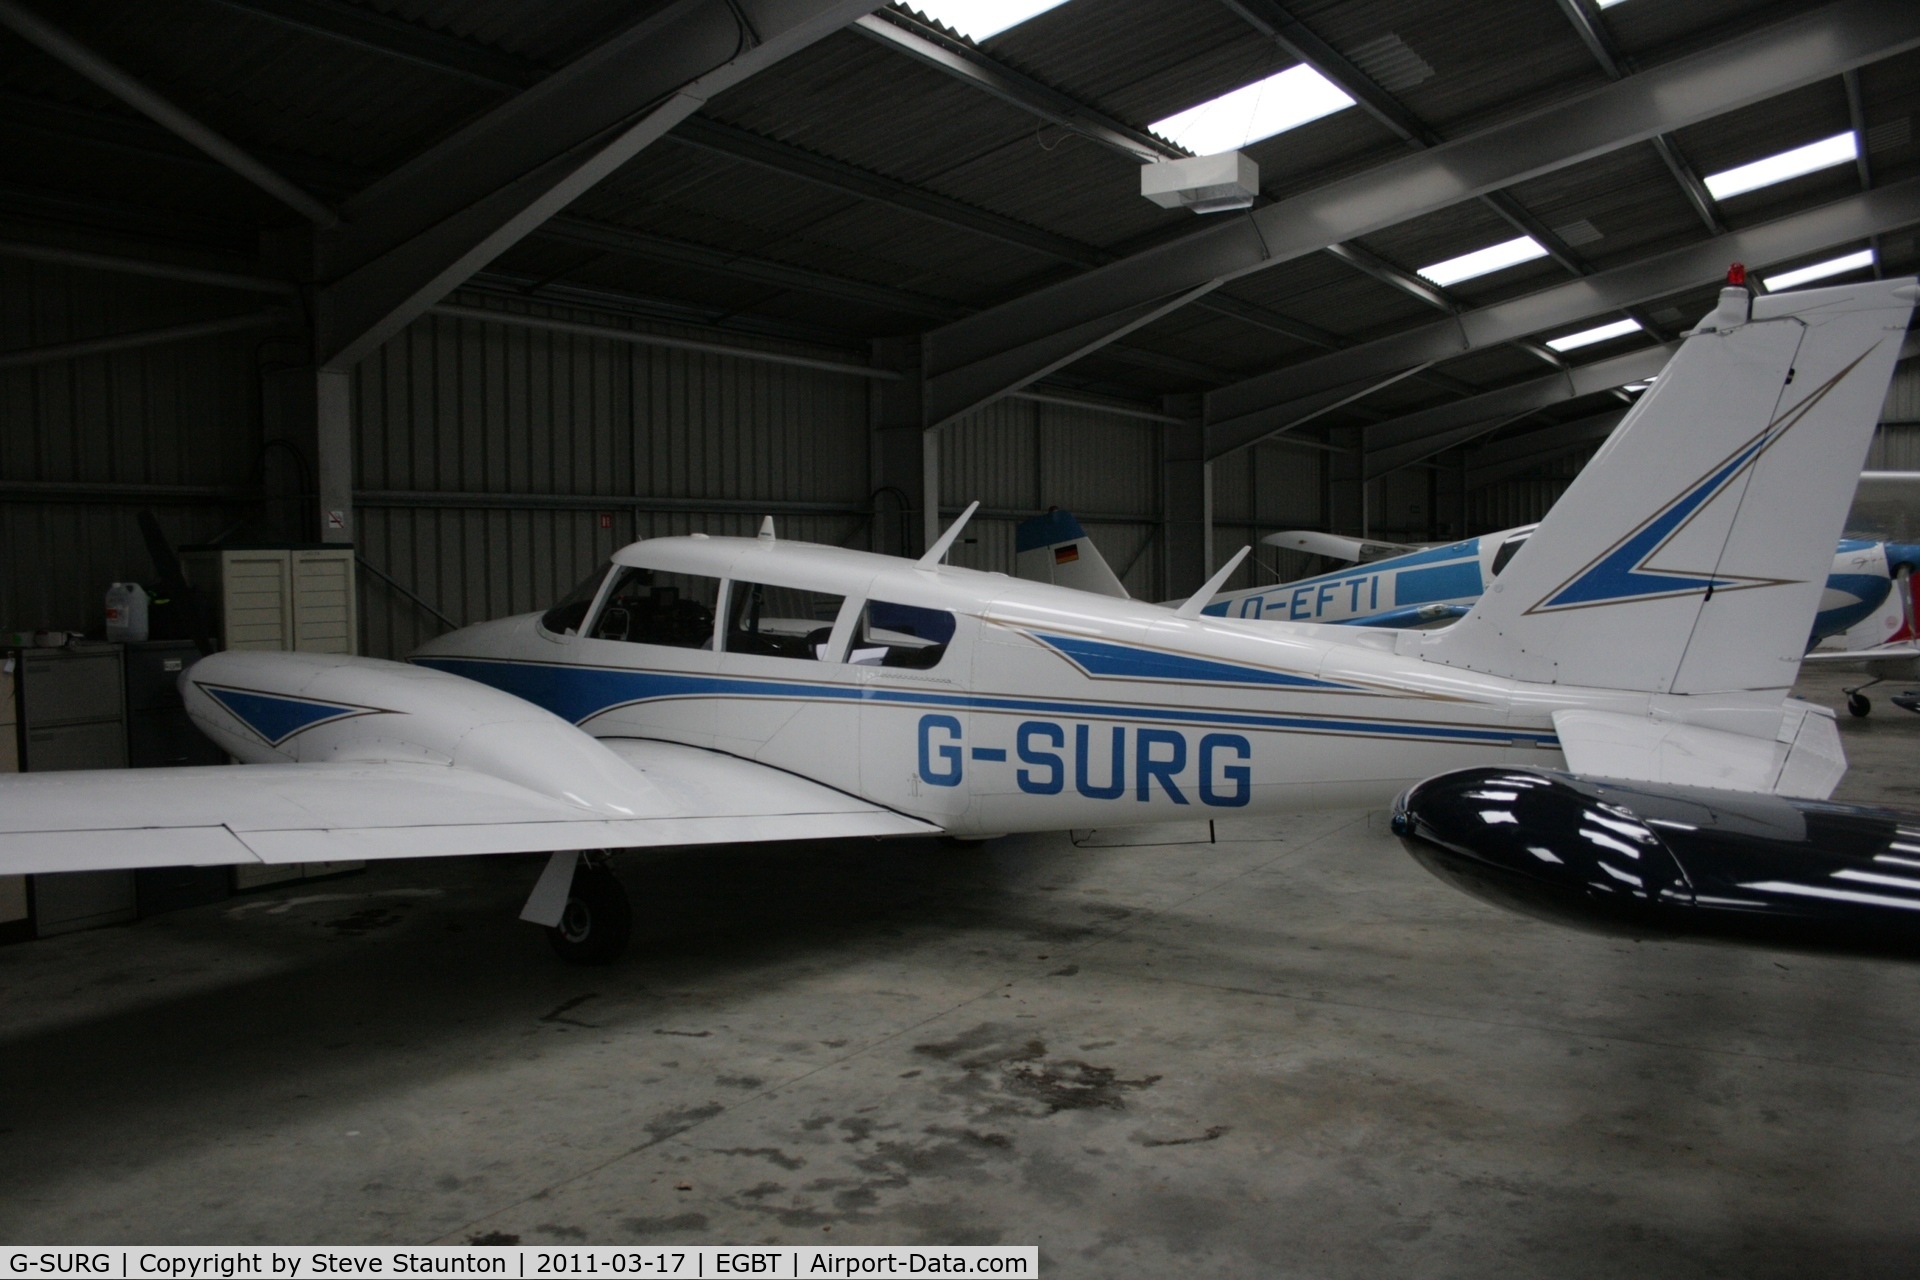 G-SURG, 1967 Piper PA-30-160 B Twin Comanche C/N 30-1424, Taken at Turweston Airfield March 2010